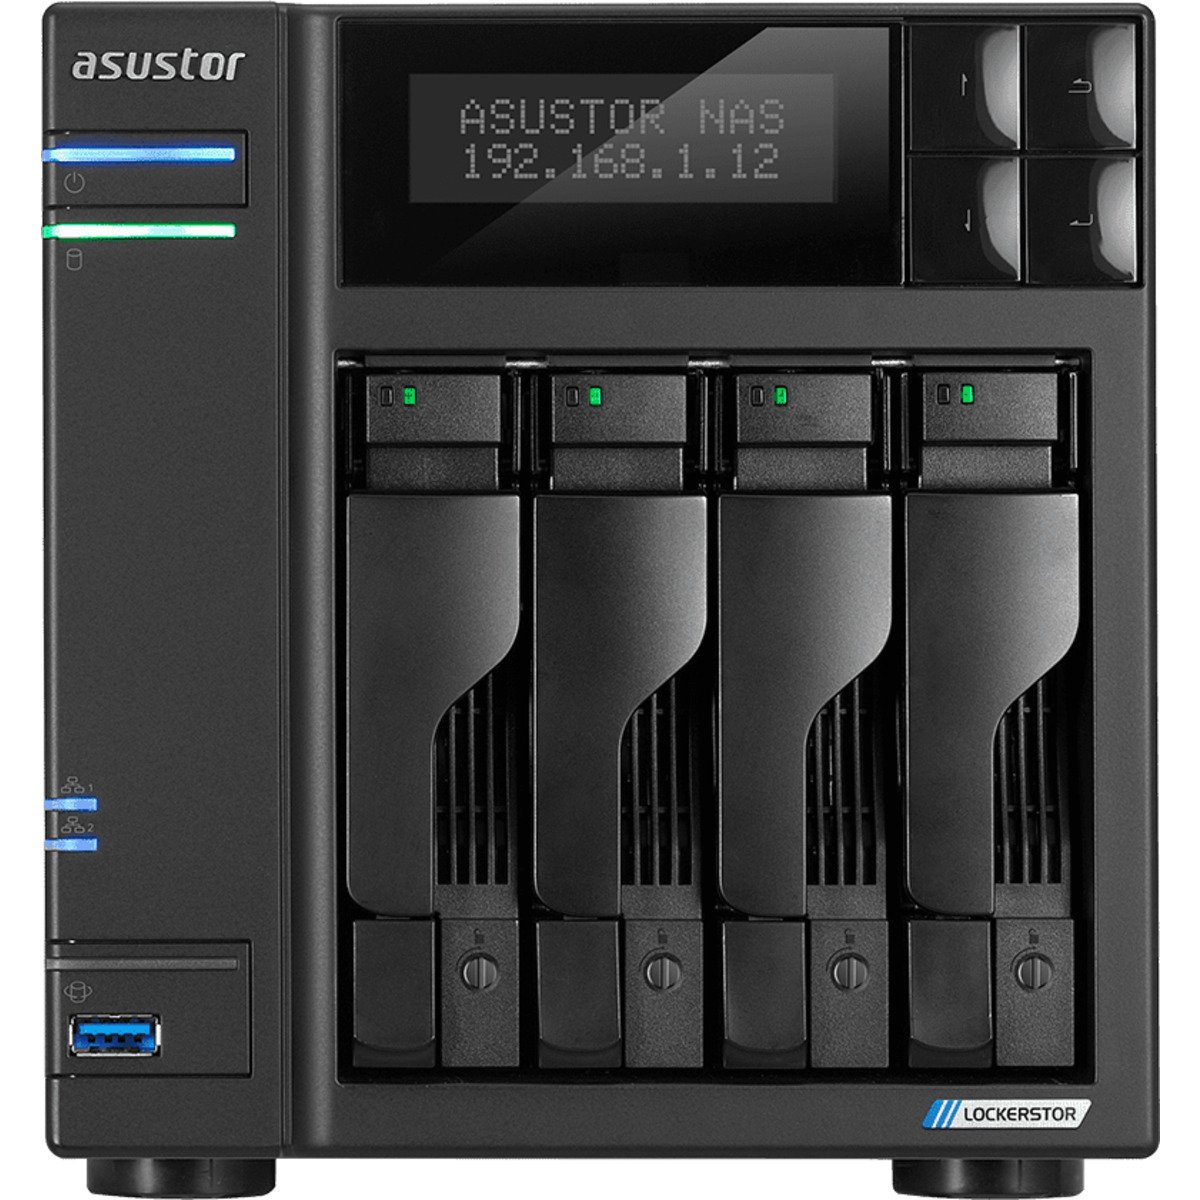 ASUSTOR AS6604T Lockerstor 4 42tb 4-Bay Desktop Multimedia / Power User / Business NAS - Network Attached Storage Device 3x14tb Toshiba Enterprise Capacity MG07ACA14TE 3.5 7200rpm SATA 6Gb/s HDD ENTERPRISE Class Drives Installed - Burn-In Tested - FREE RAM UPGRADE AS6604T Lockerstor 4